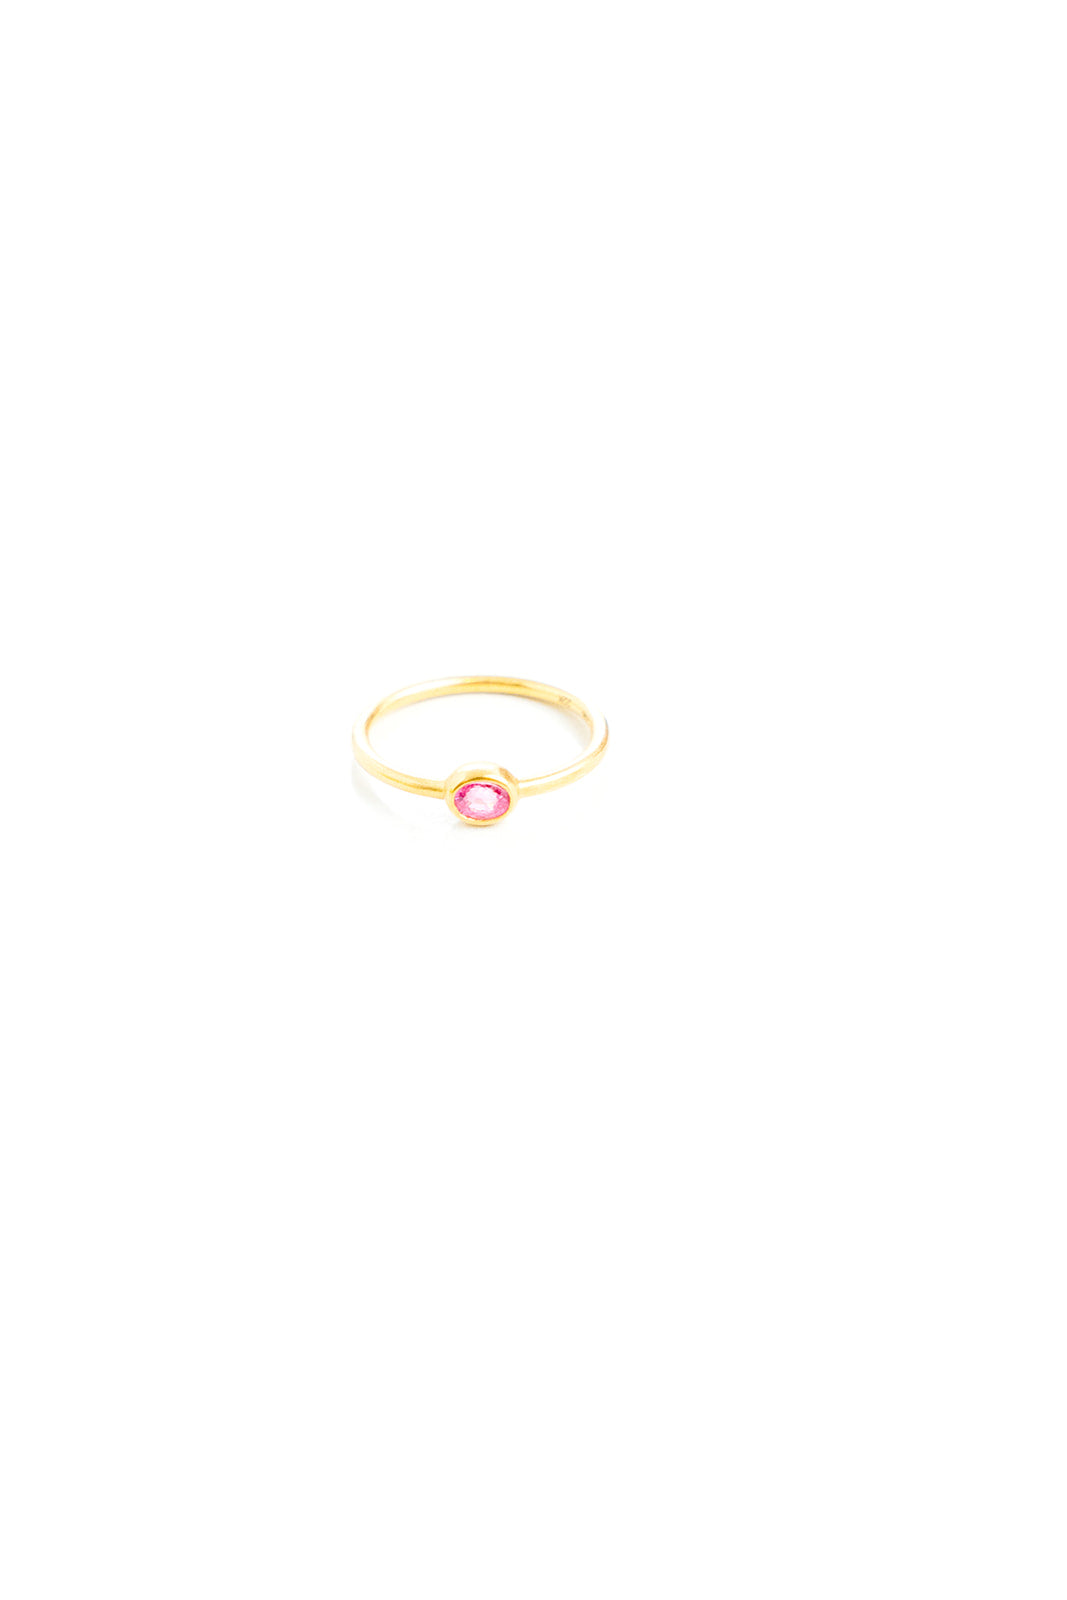 Marie-Helene-de-Taillac-22K-Yellow-Gold-Pink-Spinel-ThinRoman-Ring-Amarees